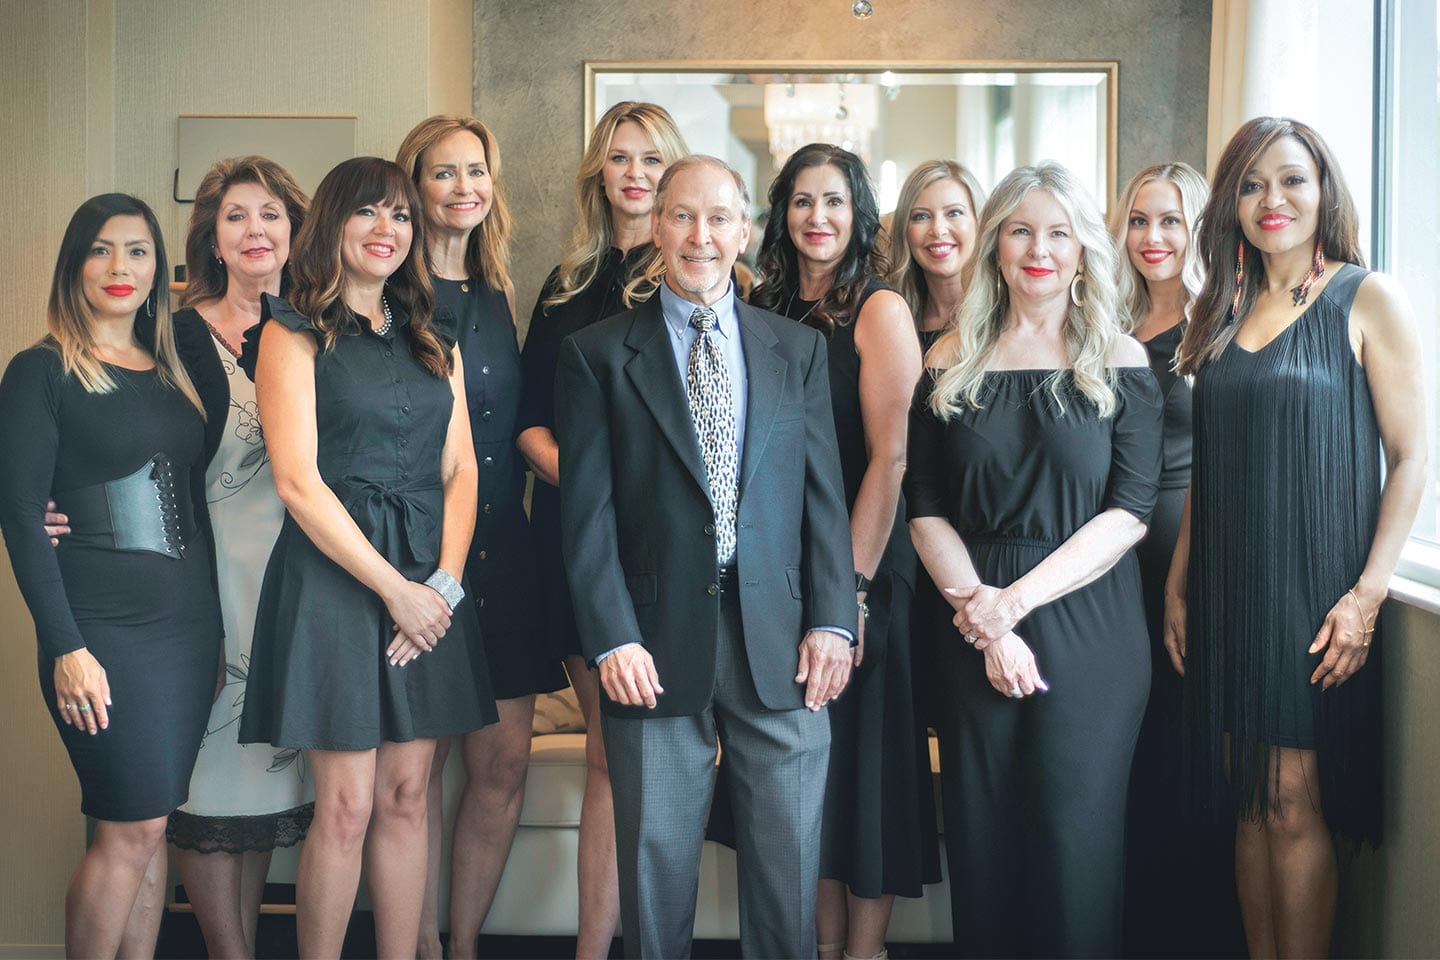 group photo of the team at center for facial rejuvenation